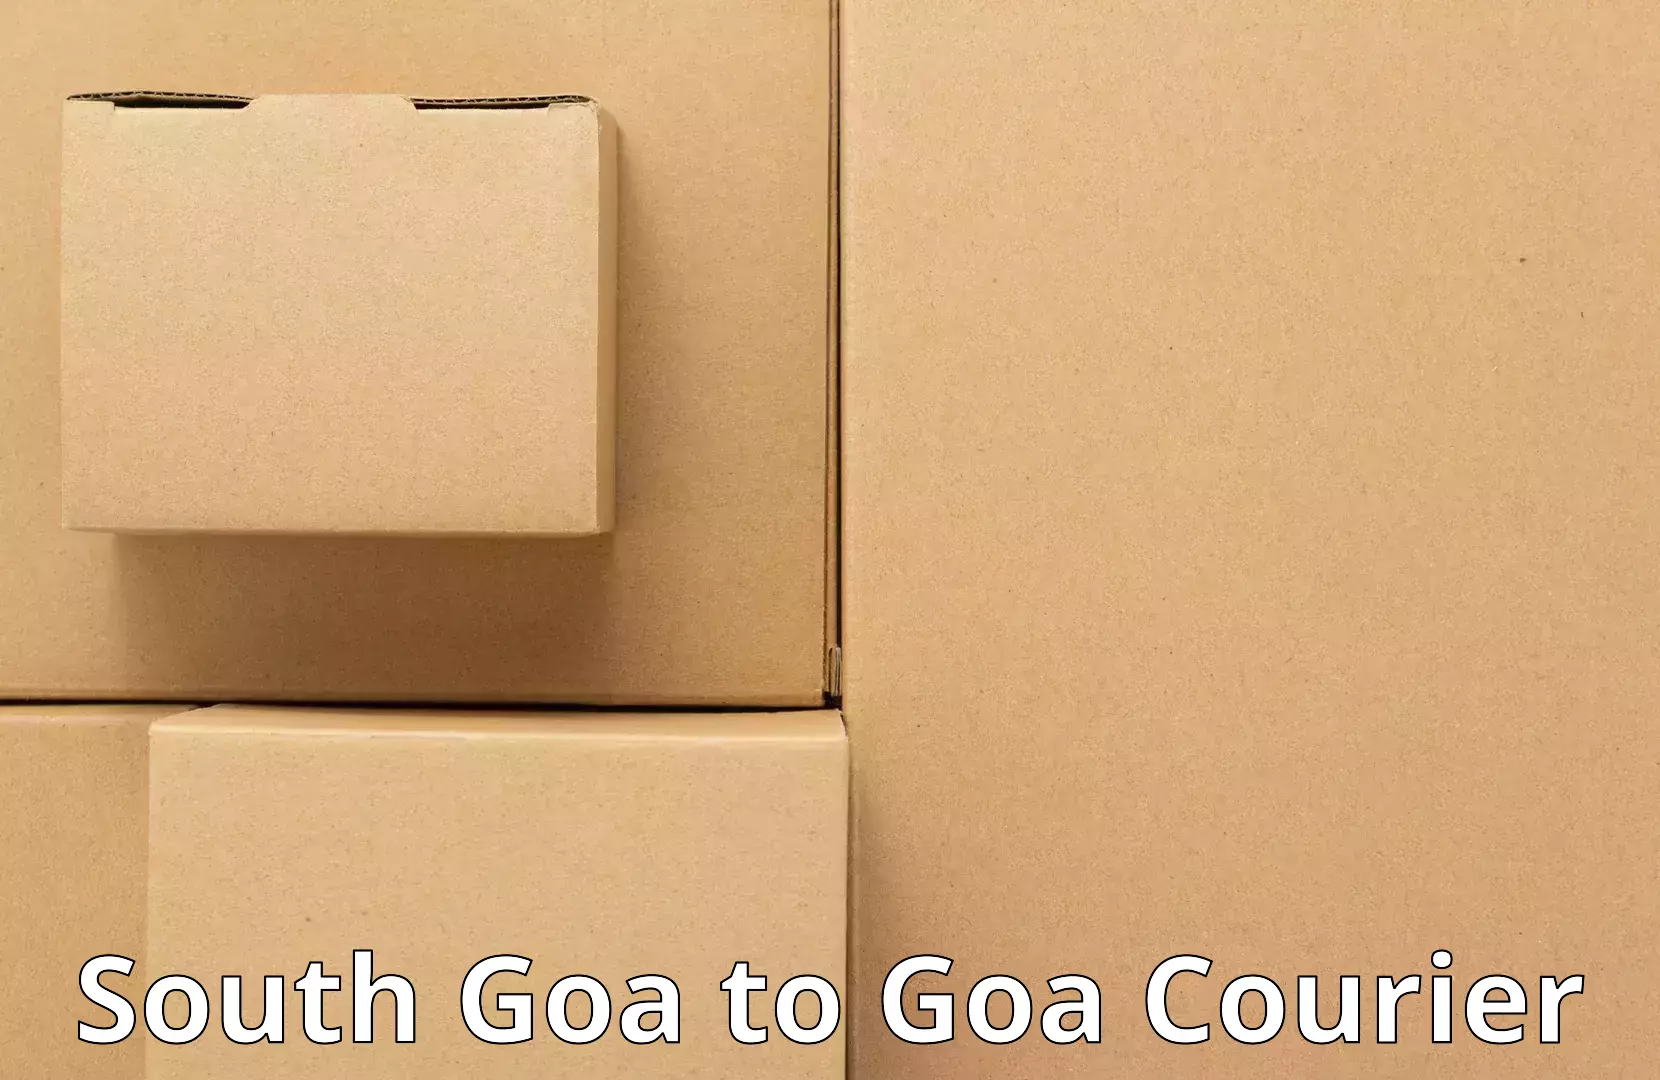 Furniture transport and storage South Goa to South Goa